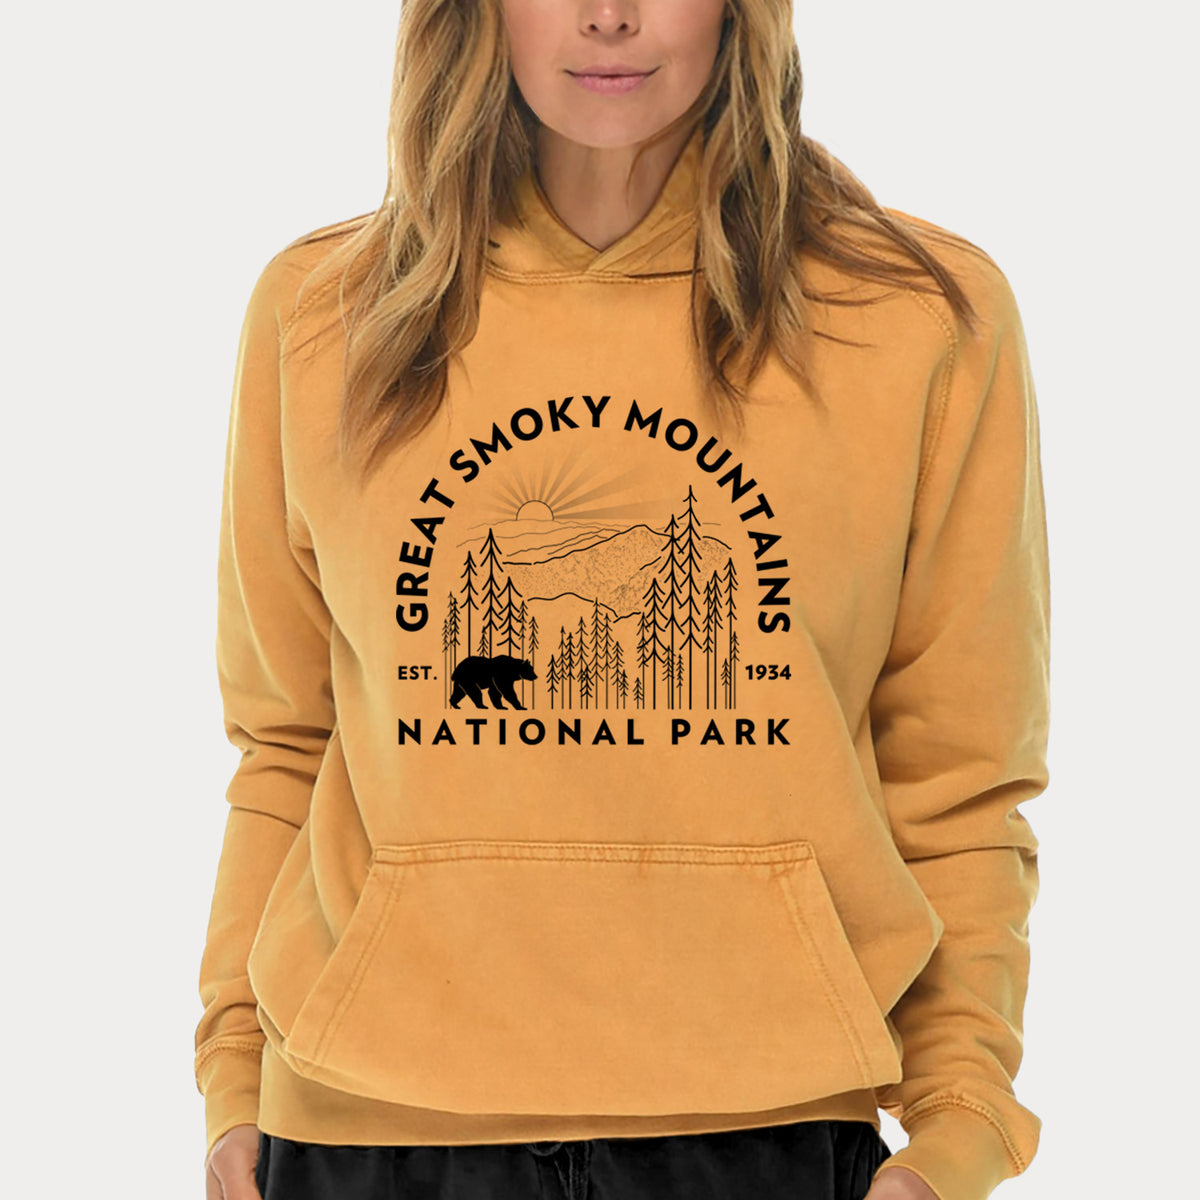 Great Smoky Mountains National Park  - Mid-Weight Unisex Vintage 100% Cotton Hoodie